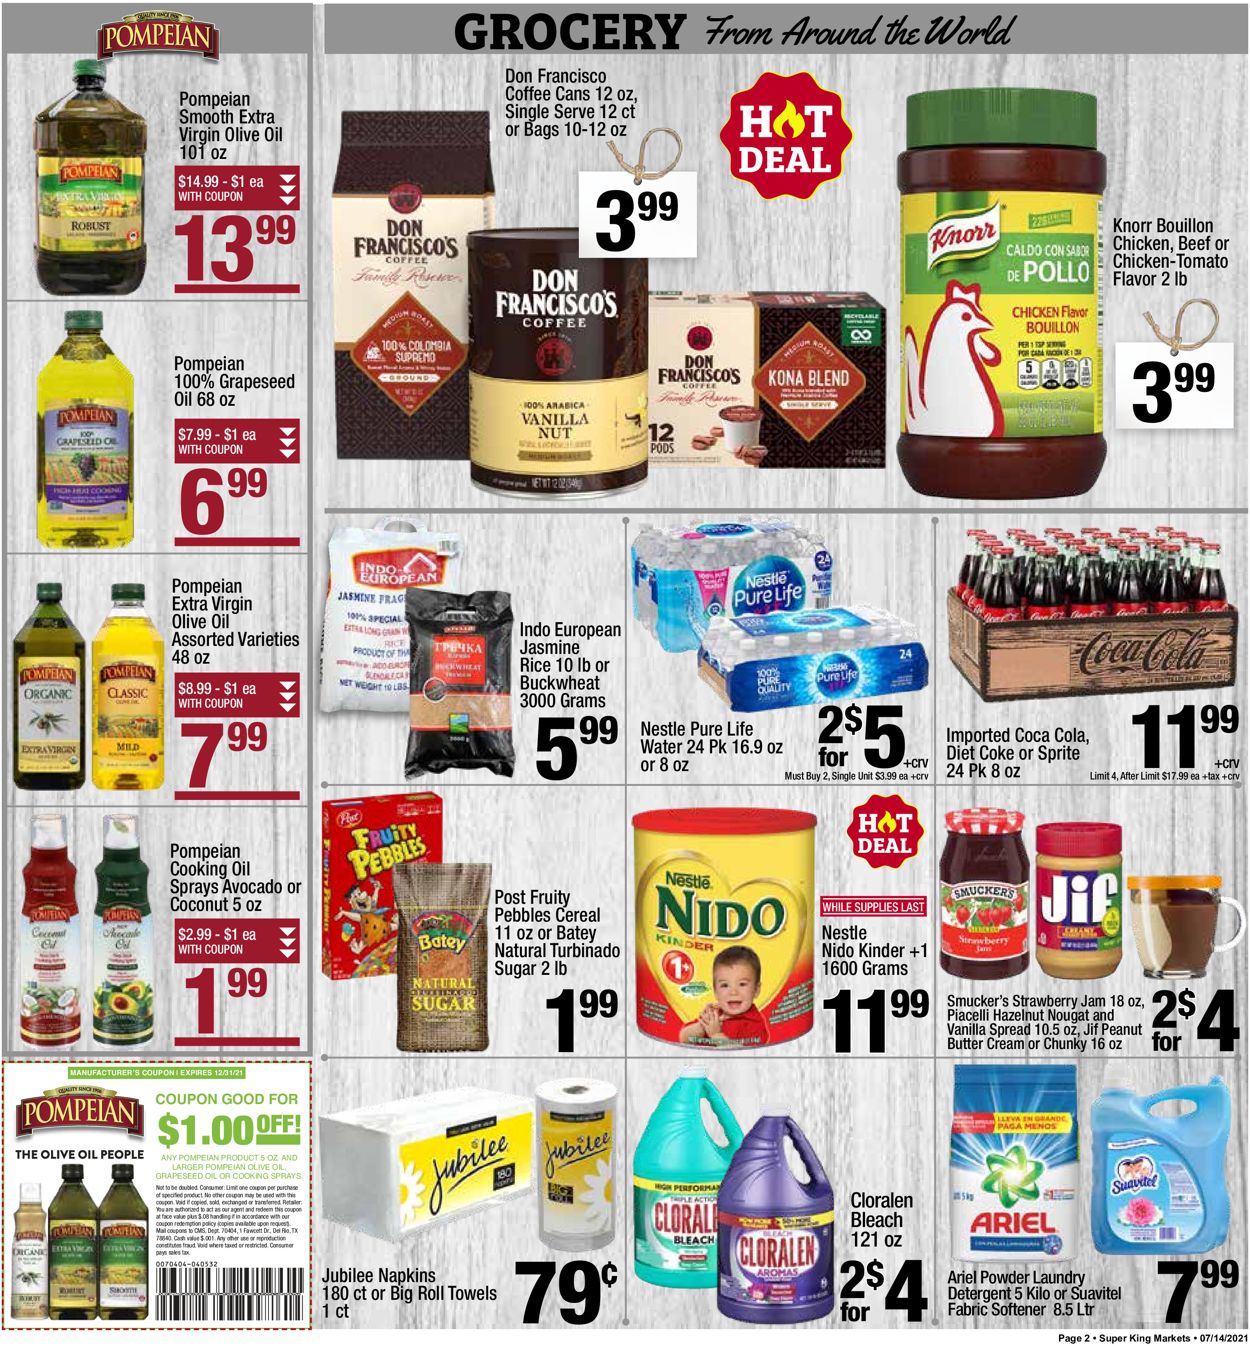 Super King Market Ad from 07/14/2021